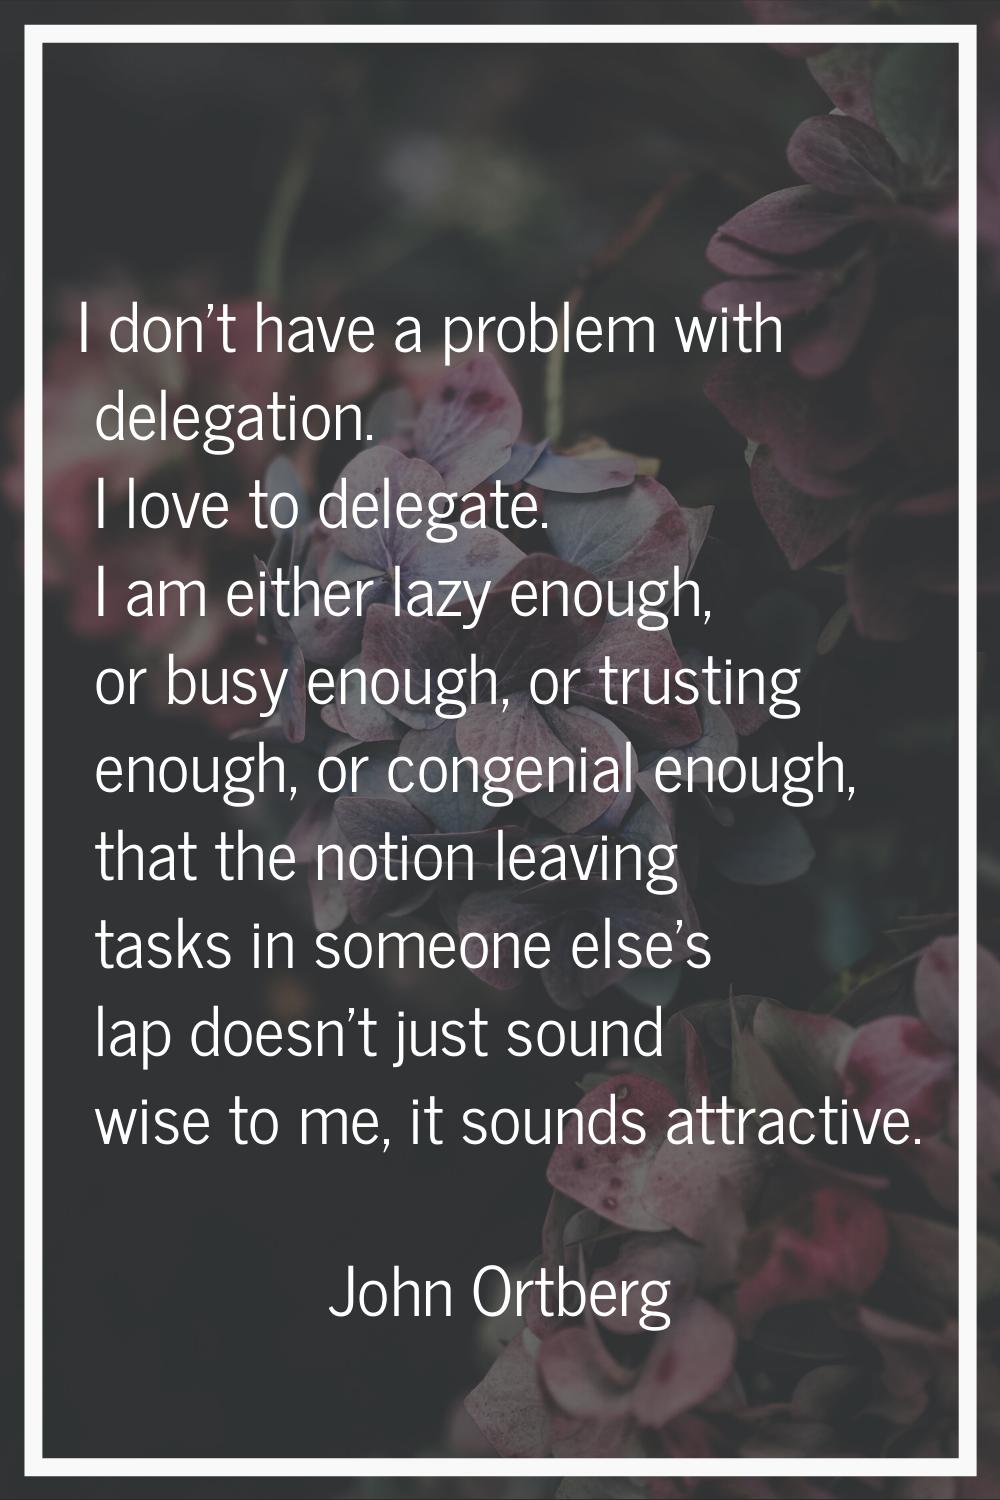 I don't have a problem with delegation. I love to delegate. I am either lazy enough, or busy enough